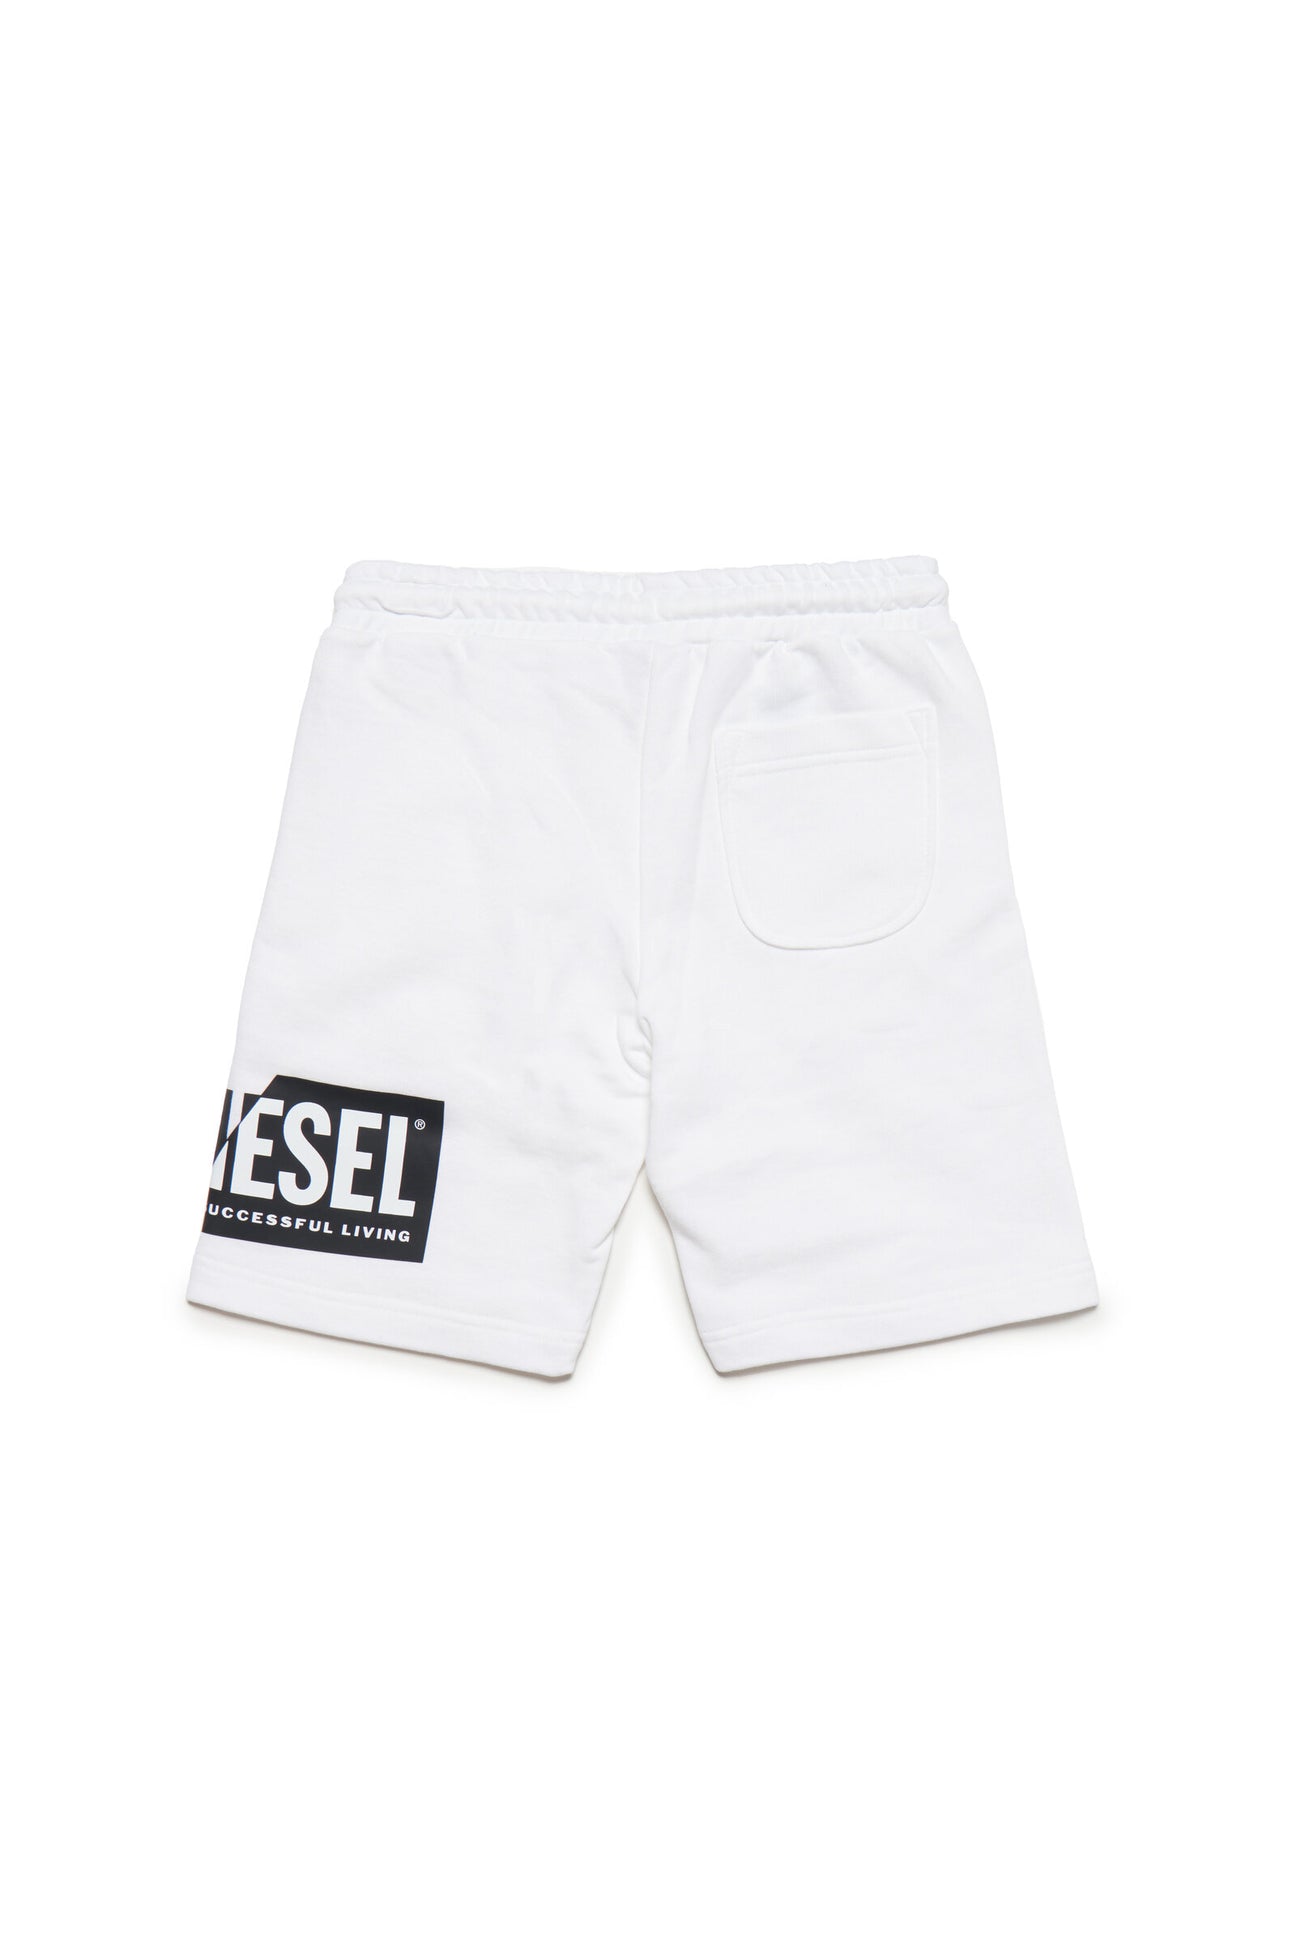 White shorts with drawstring waist and Diesel double logo White shorts with drawstring waist and Diesel double logo